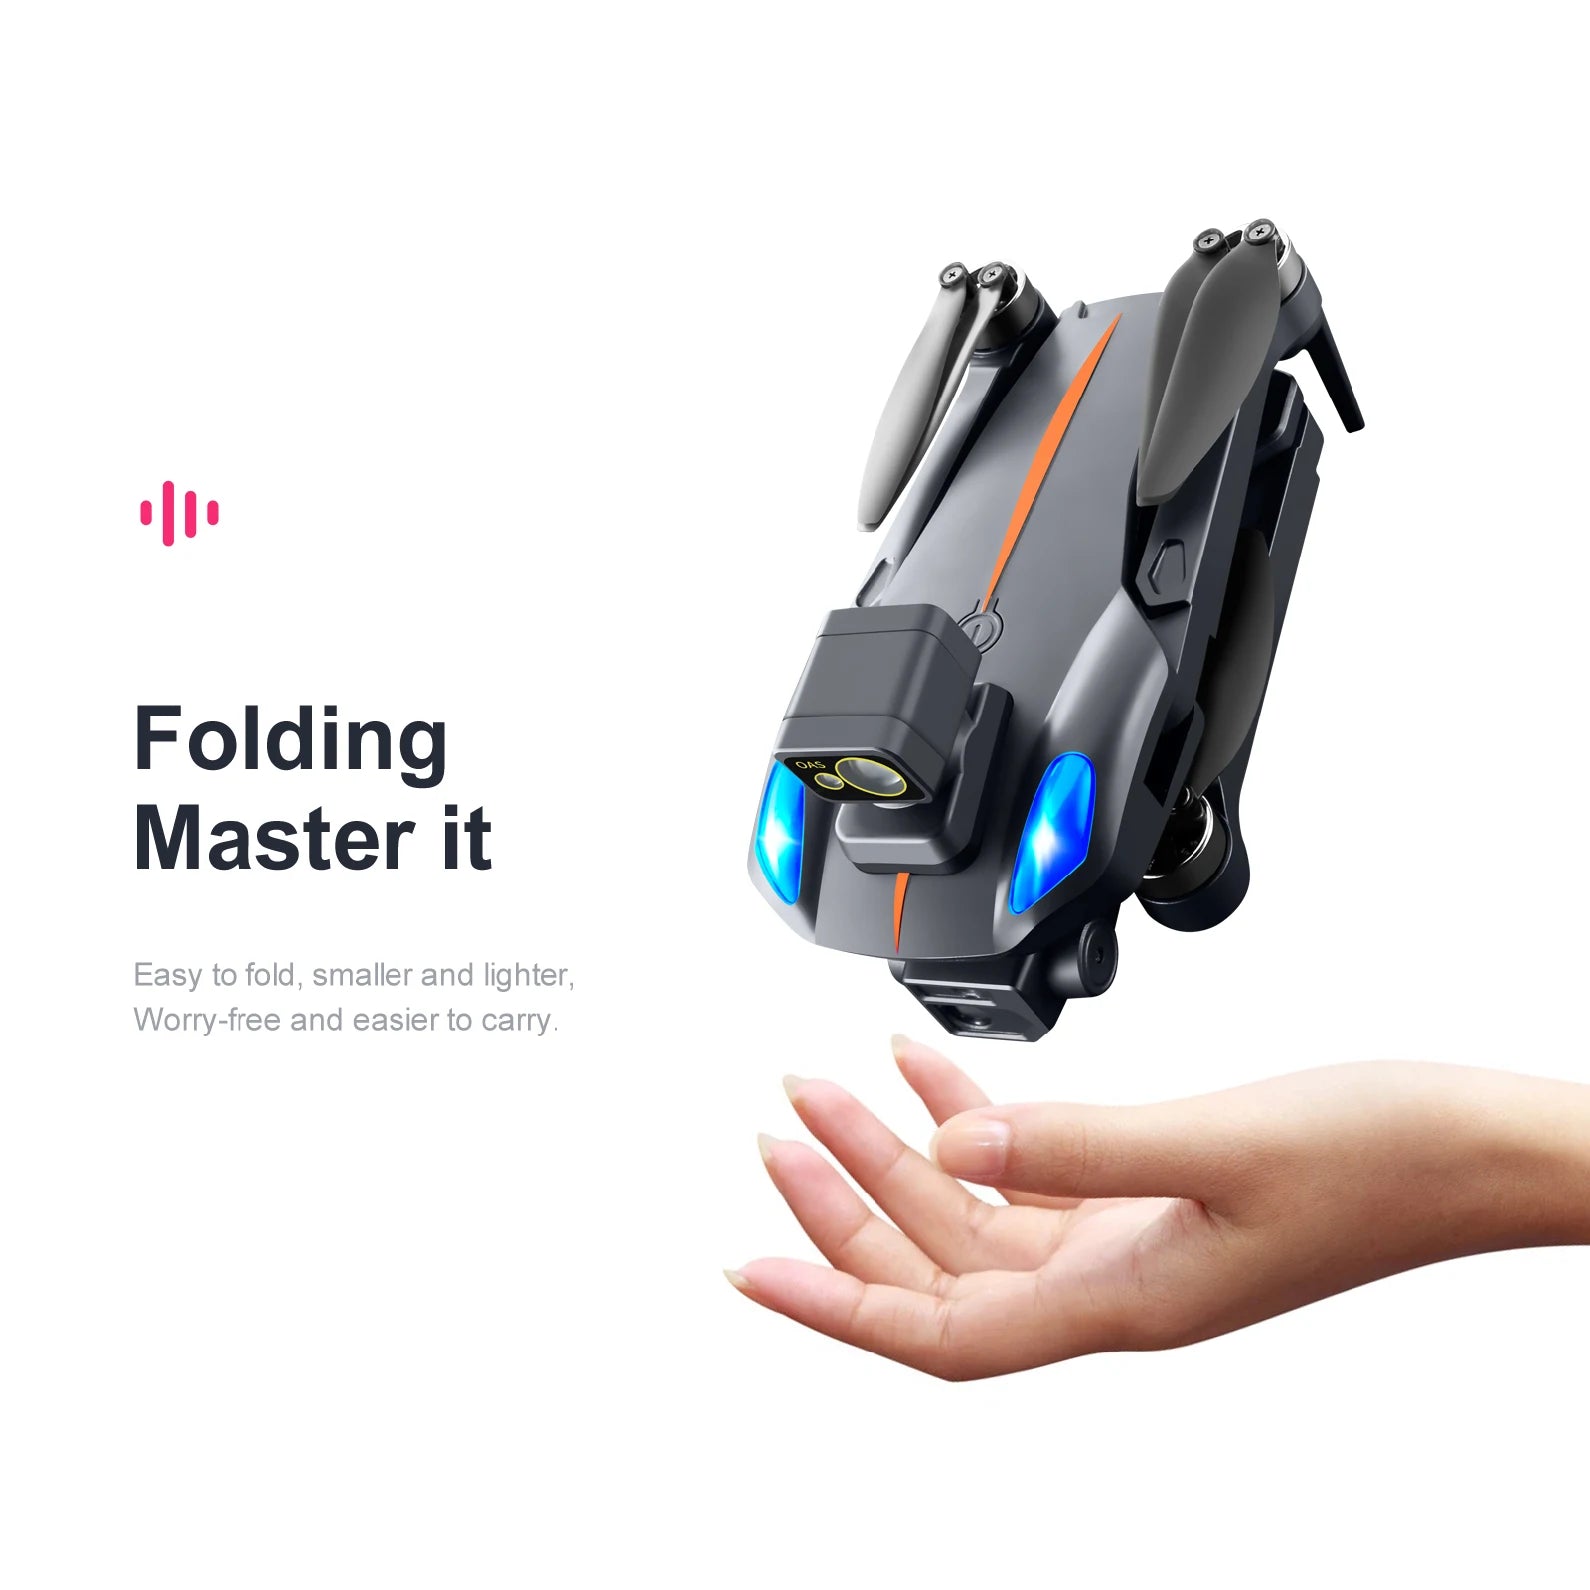 Folding Di Master it Easy to fold, smaller and lighter; Worry-free and easier